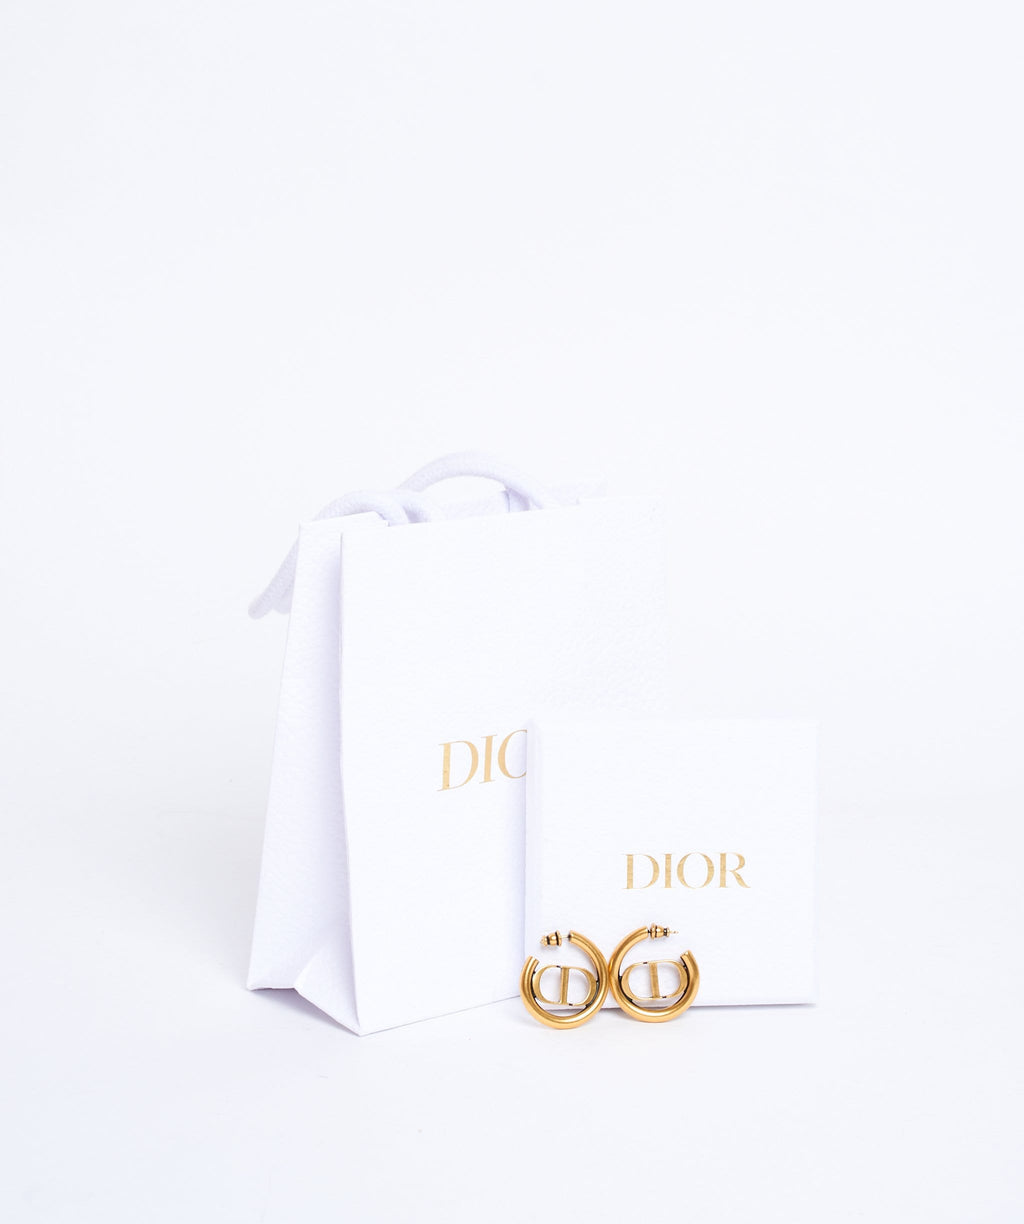 Dior 30 Montaigne hoop earrings in antique goldtone with initials in hoops   DOWNTOWN UPTOWN Genève